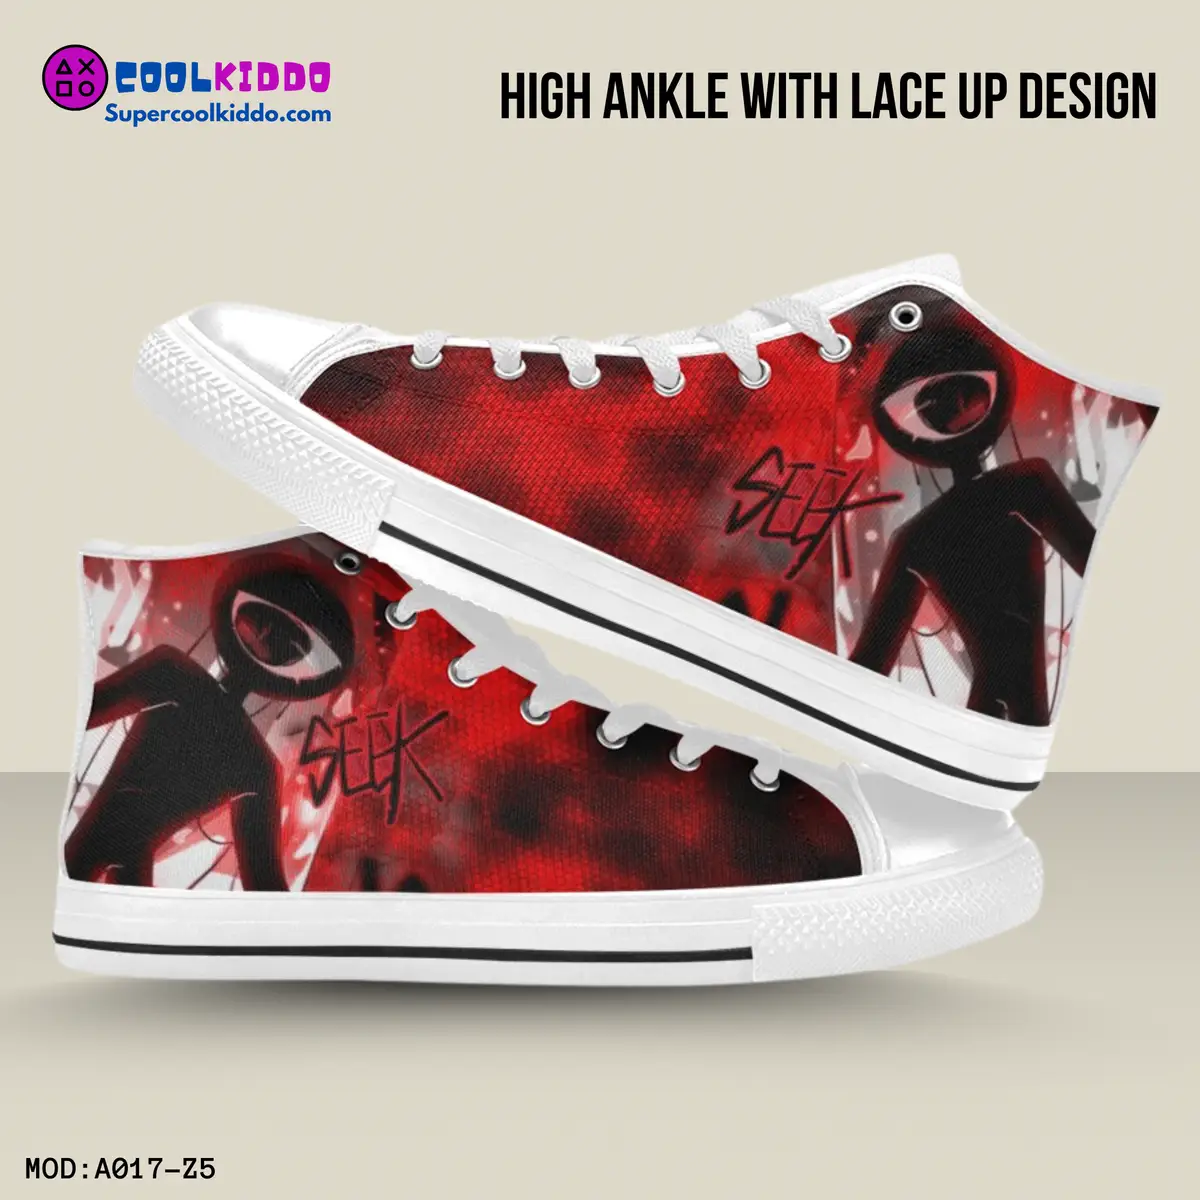 Roblox Doors Inspired High Top Shoes for Kids/Youth – “Seek” Character Print. High-Top Sneakers Cool Kiddo 16